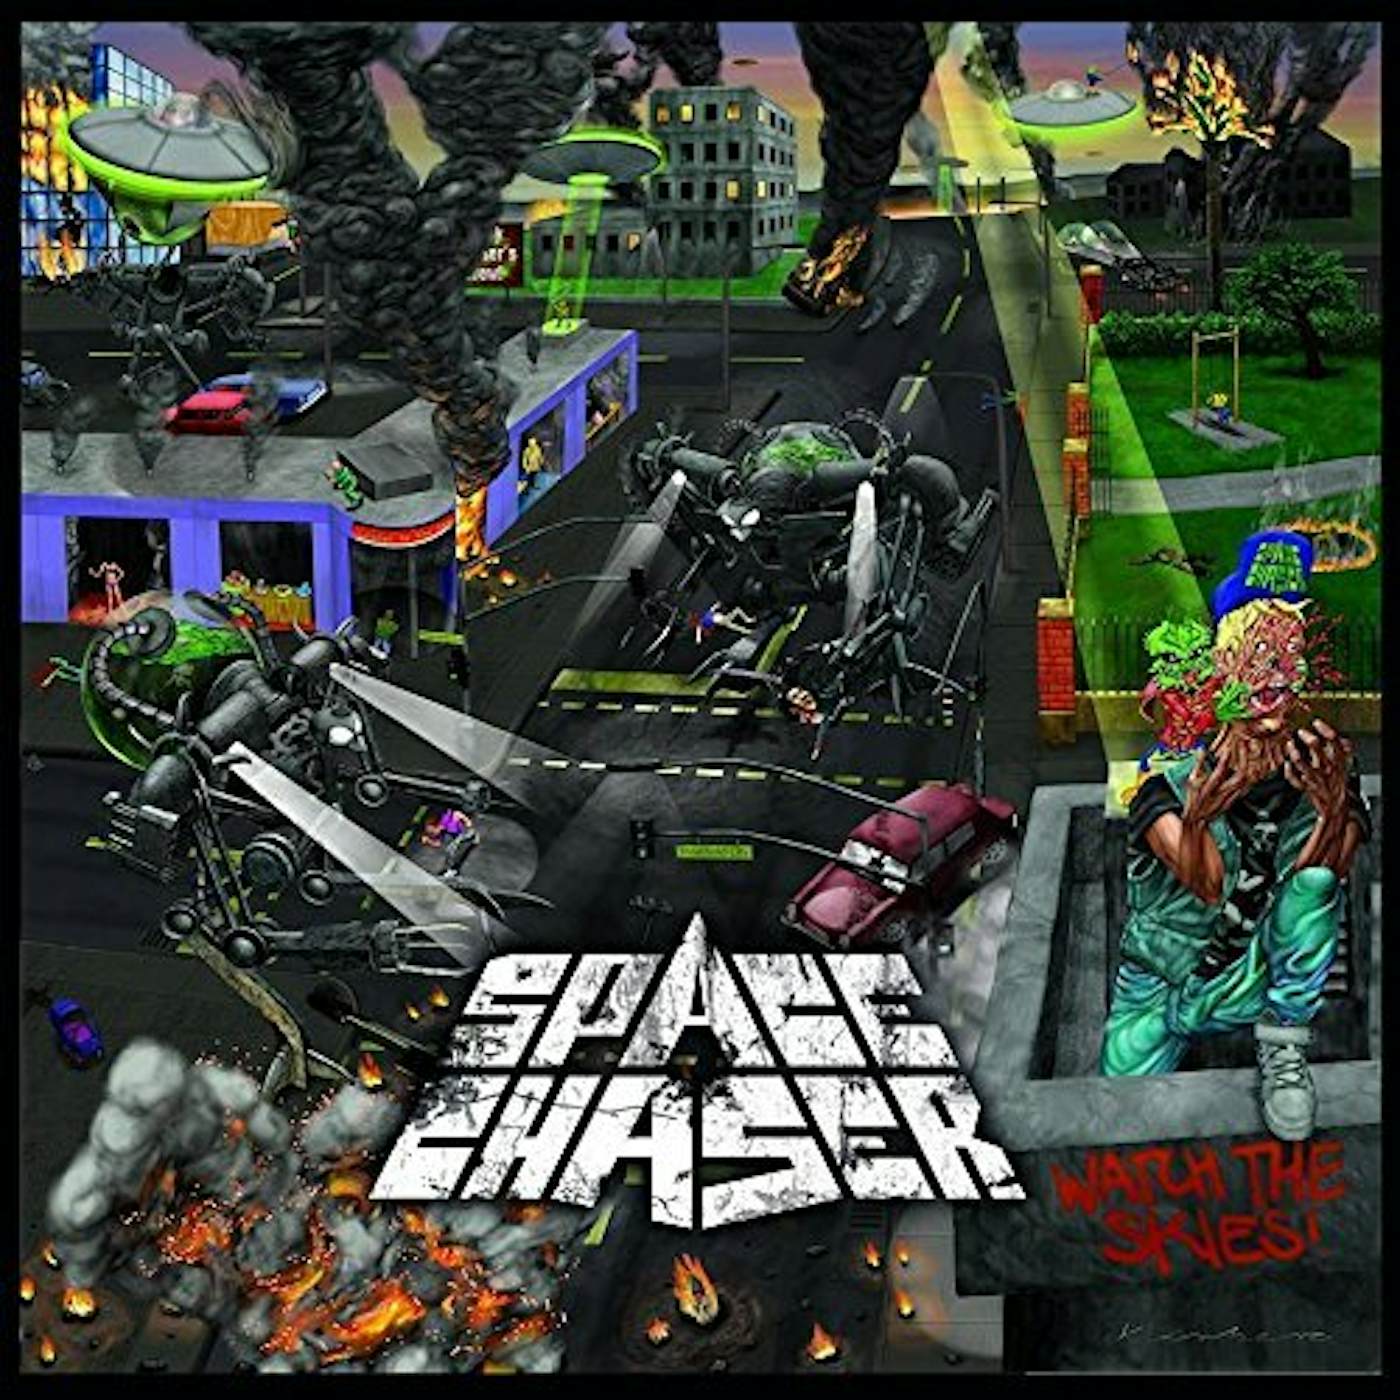 Space Chaser WATCH THE SKIES CD